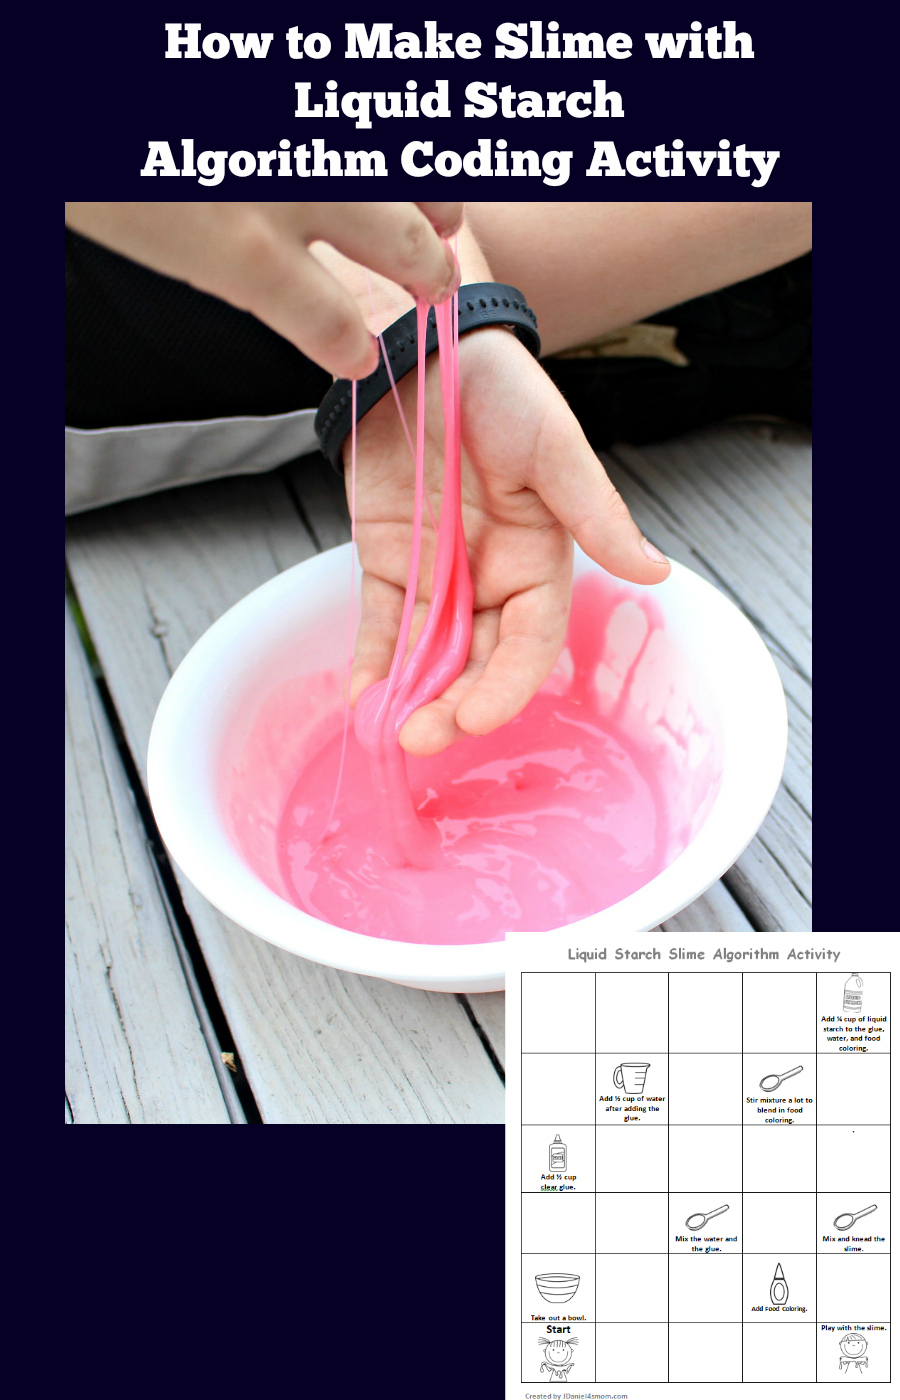 How to Make Slime with Liquid Starch Algorithm Coding Activity